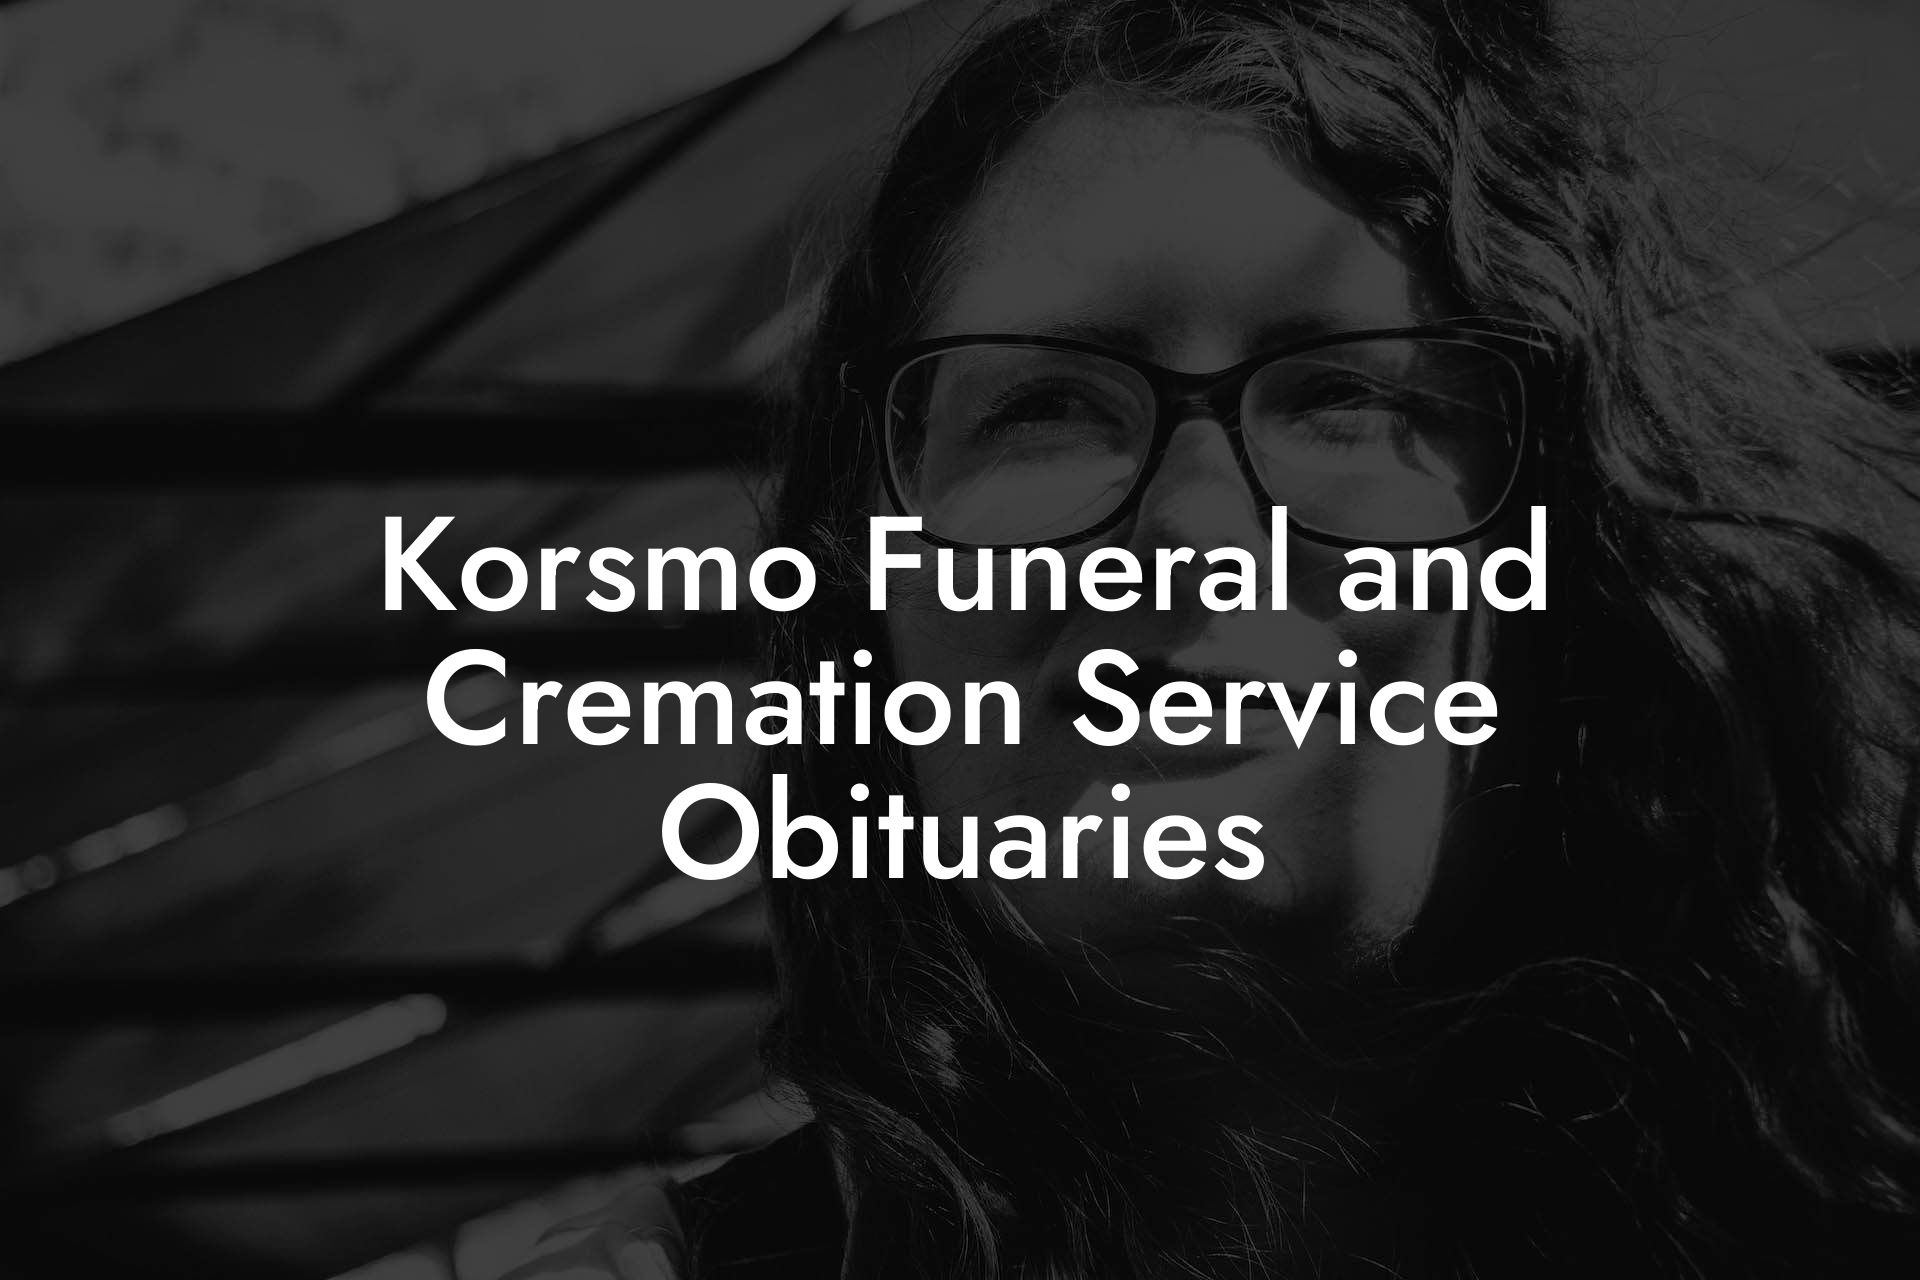 Korsmo Funeral and Cremation Service Obituaries